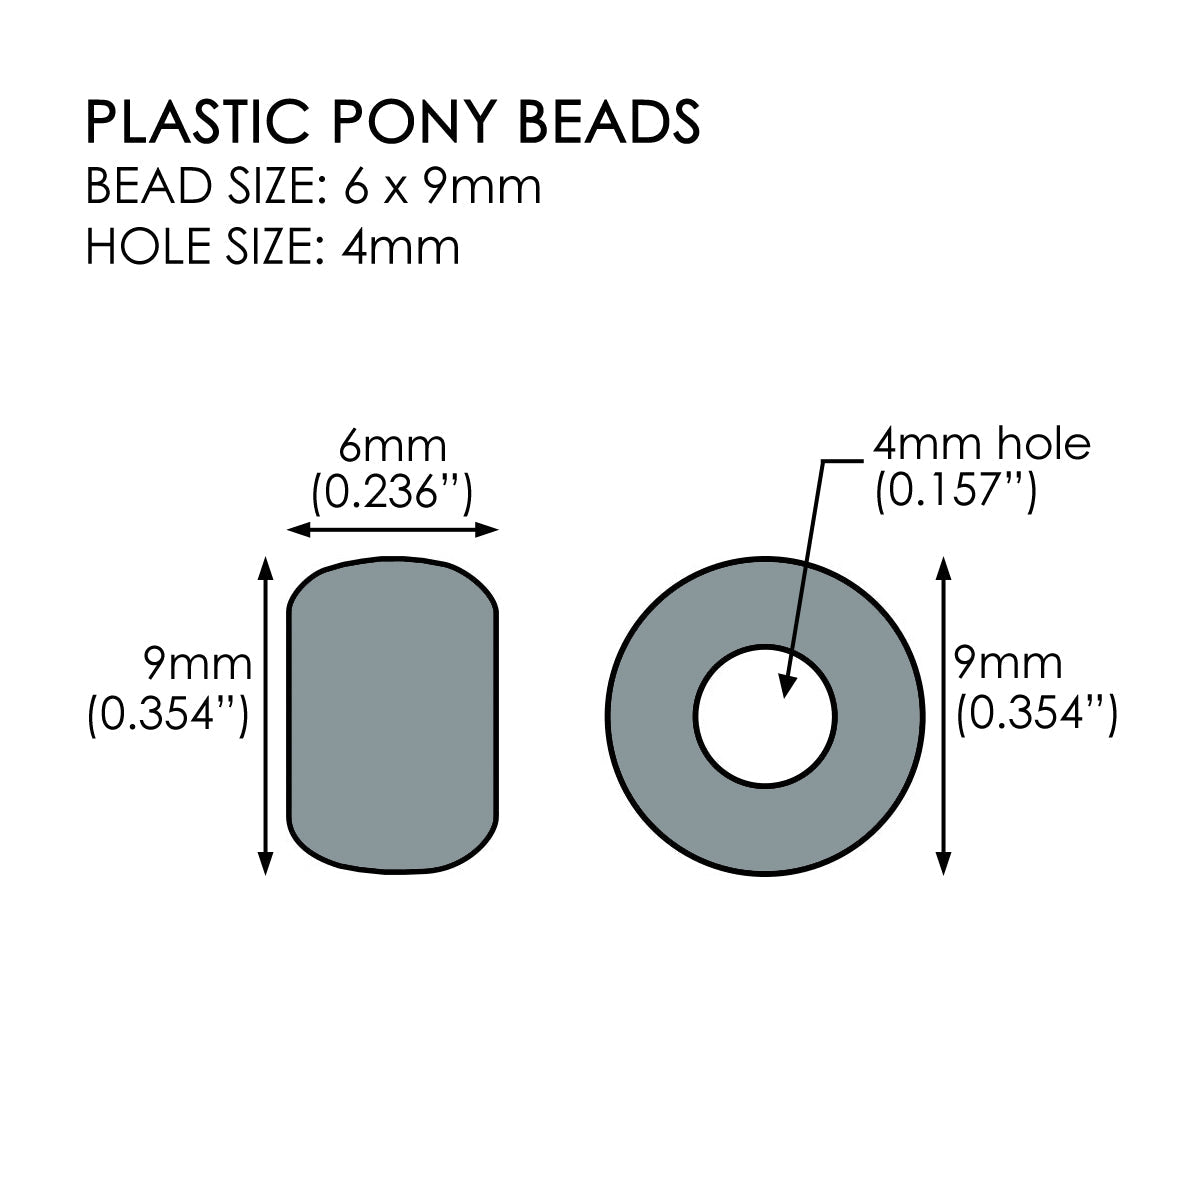 Teal Pearl Plastic Pony Beads 6 x 9mm